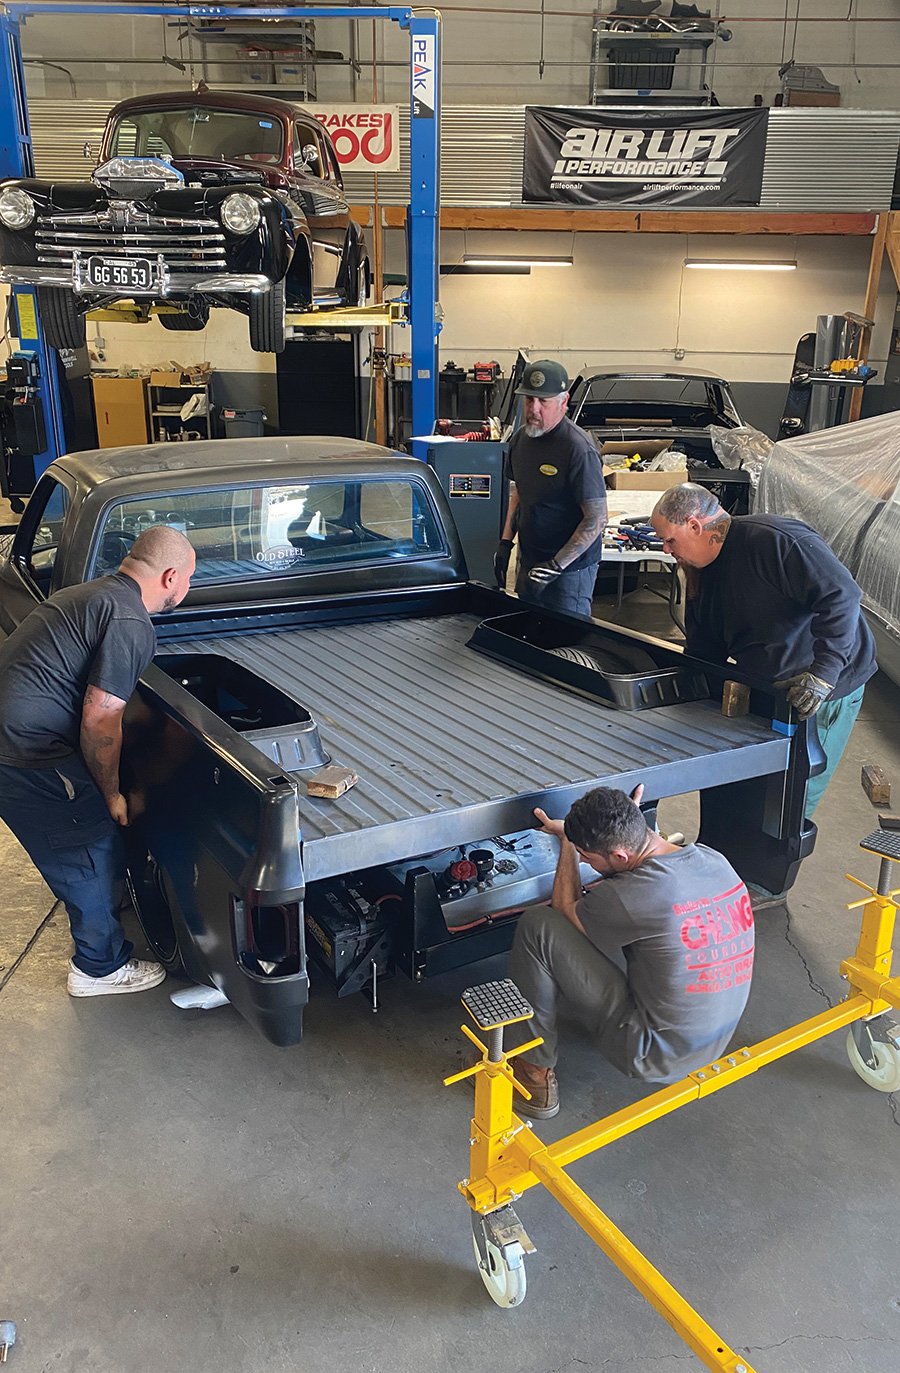 Throughout the process, utilizing (relying on) a body dolly from Jeg’s resulted in having a means in which to support and mobilize the bed made a huge difference.